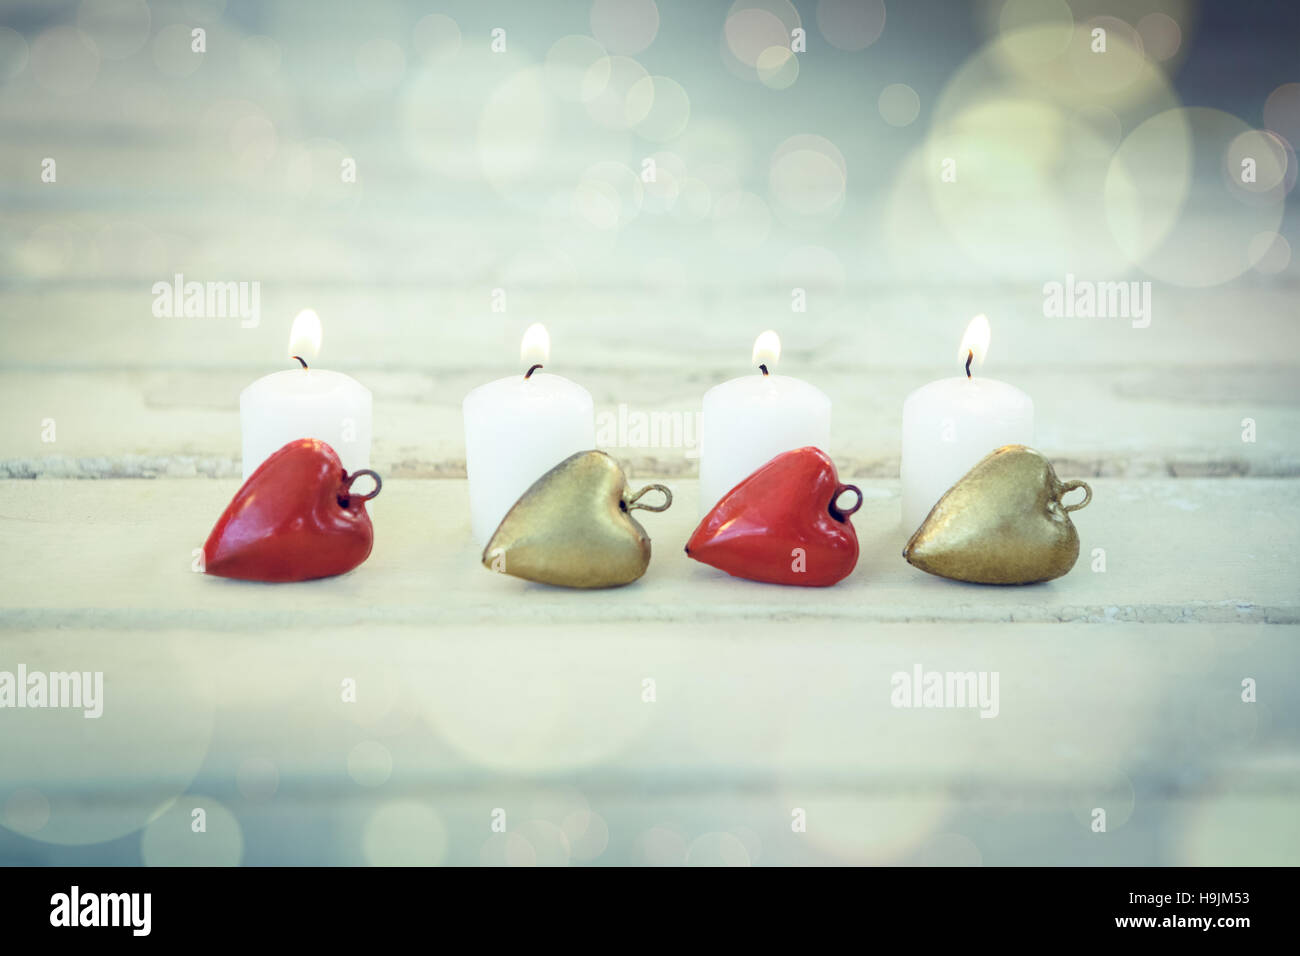 Candles burning on wooden plank Stock Photo